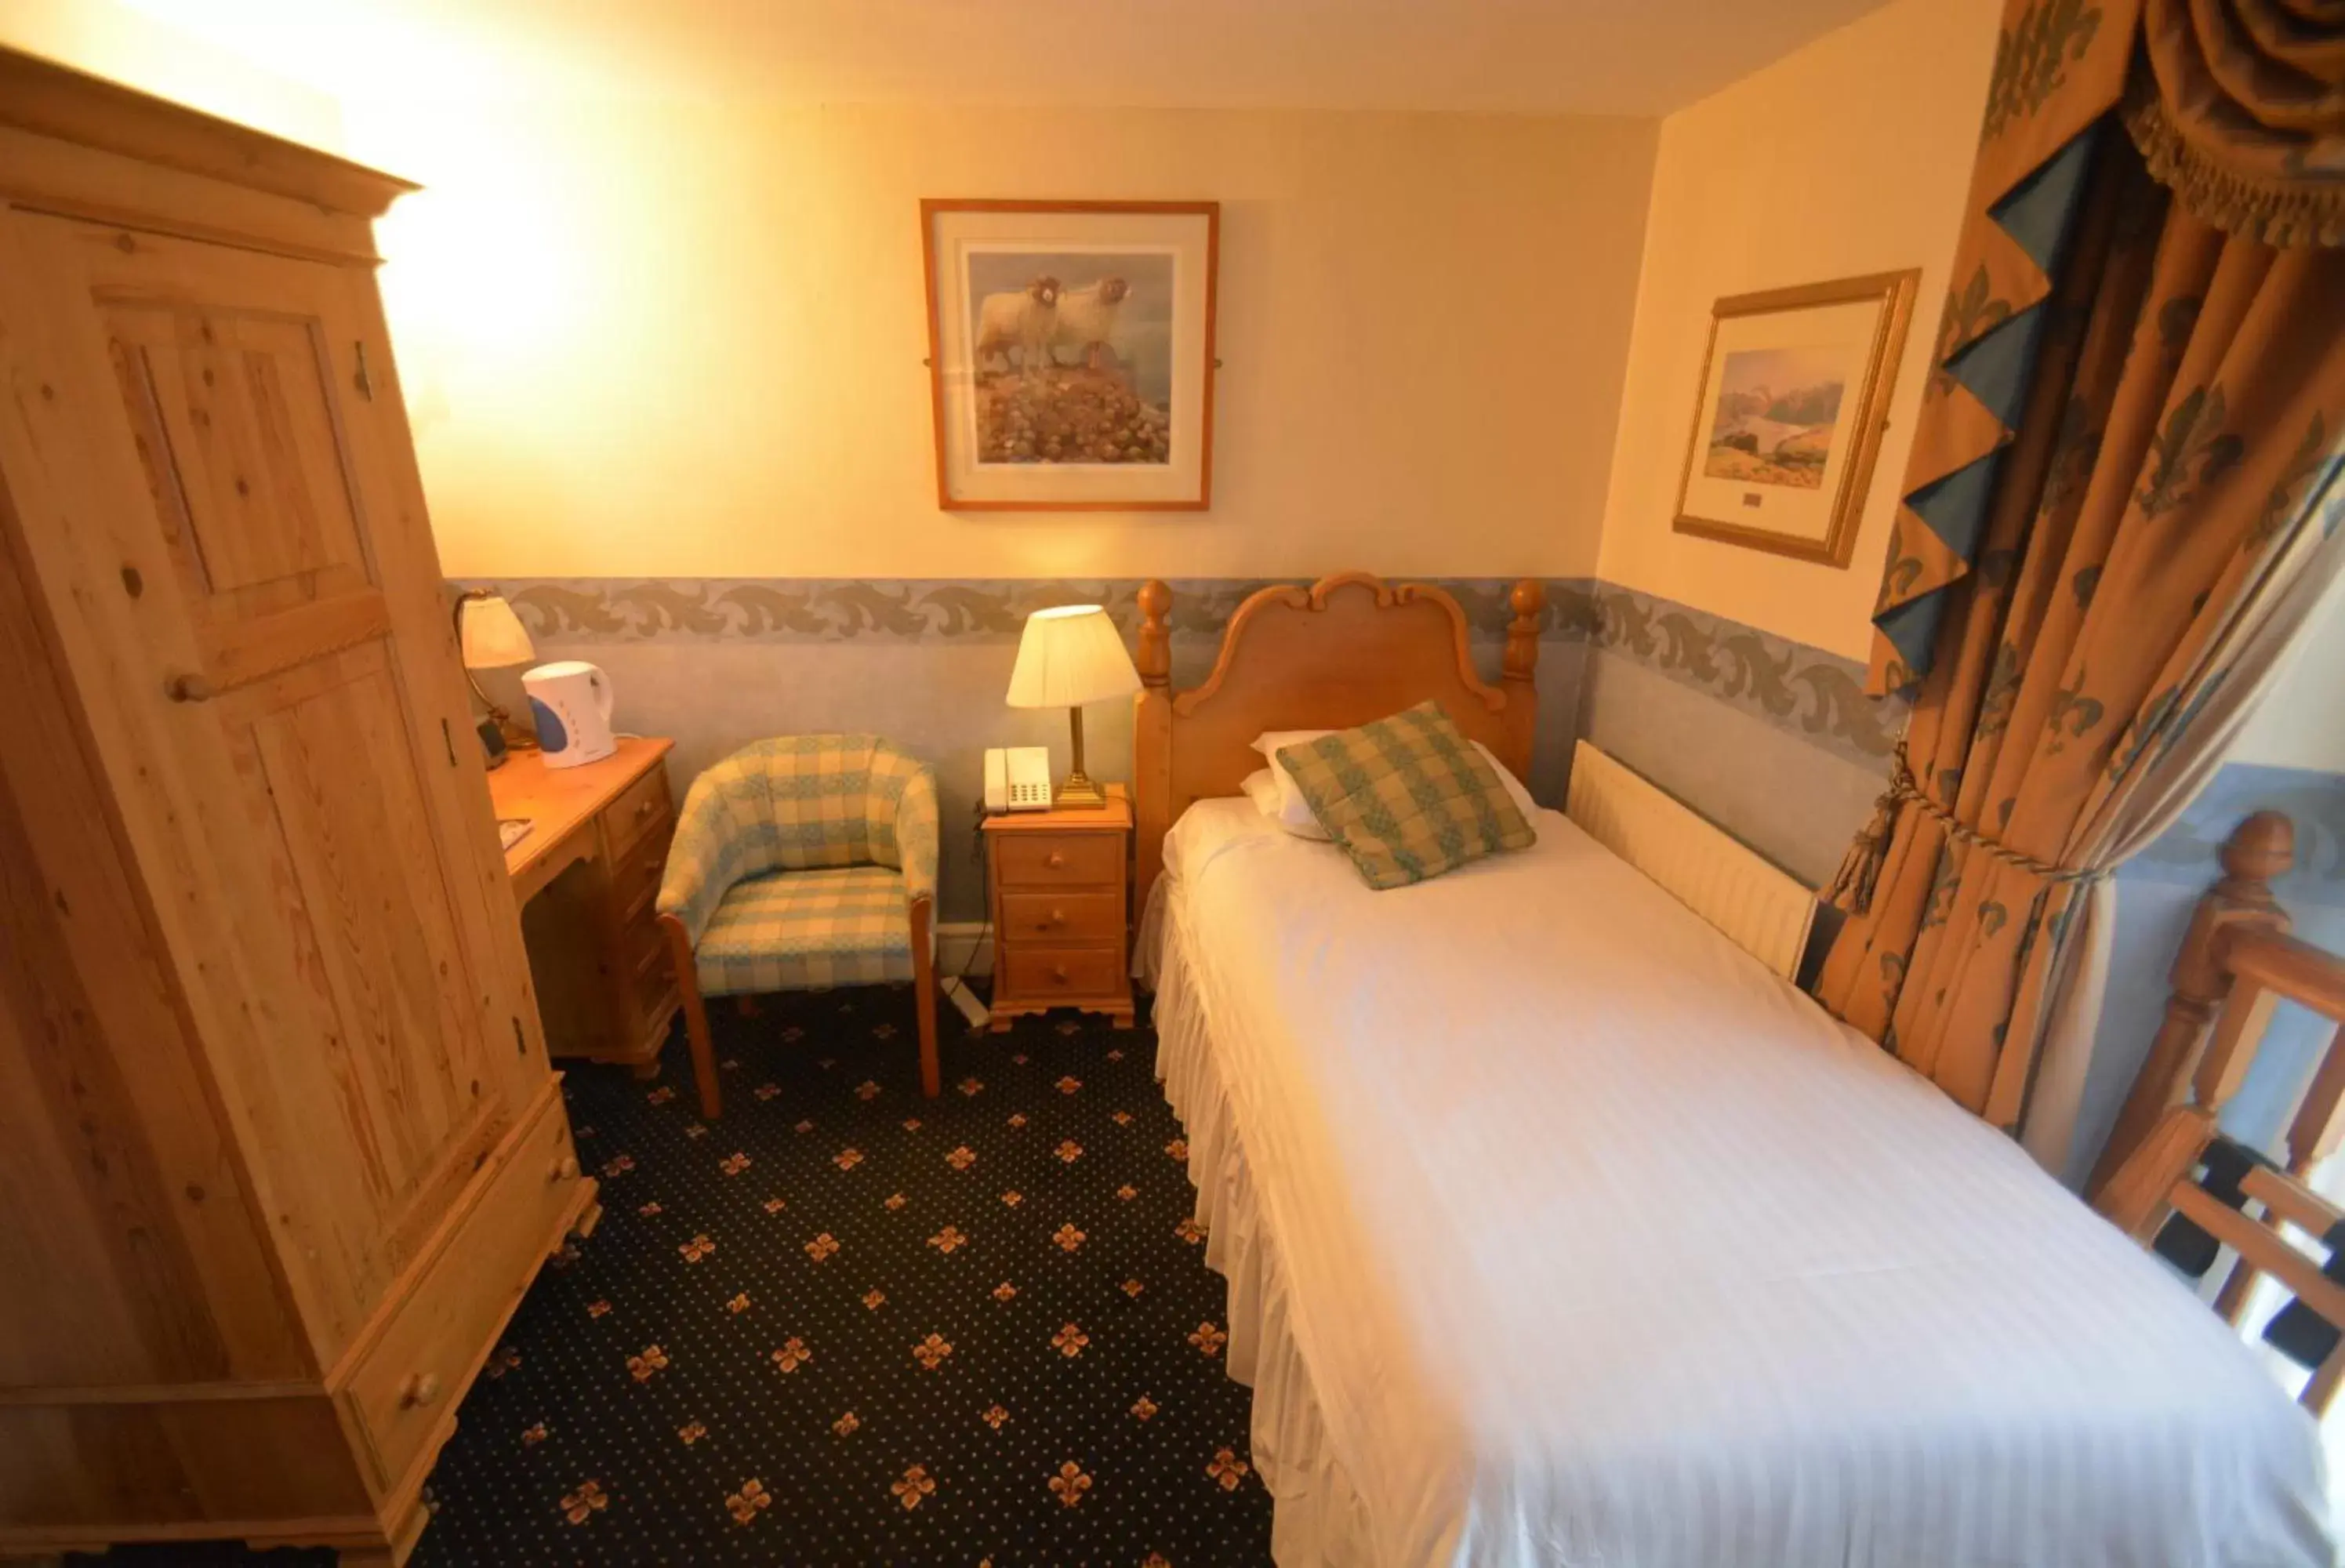 Standard Single Room in The Ennerdale Country House Hotel ‘A Bespoke Hotel’